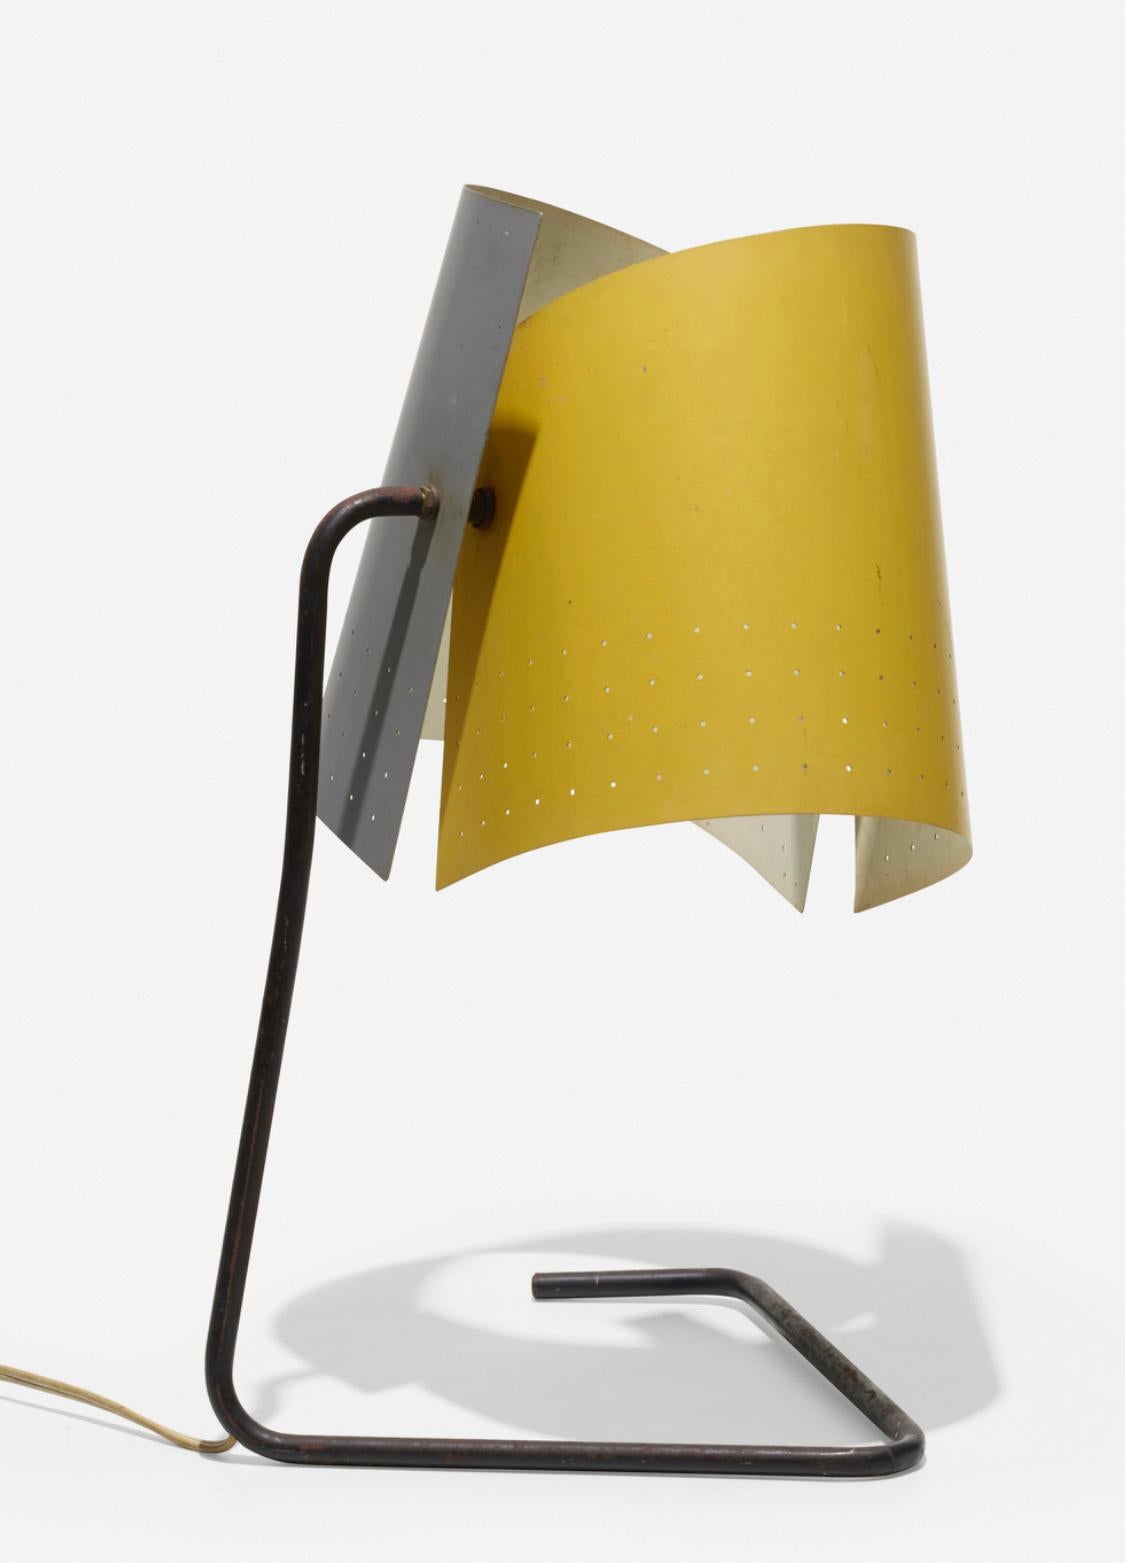 Table Lamp by Lester Geis, model T-5-G. Heifetz Manufacturing Co. USA, circa 1951. Enameled aluminum, enameled steel, and brass.
This lamp model was given an honourable mention at the Museum of Modern Art's low-cost lighting competition, New Lamps